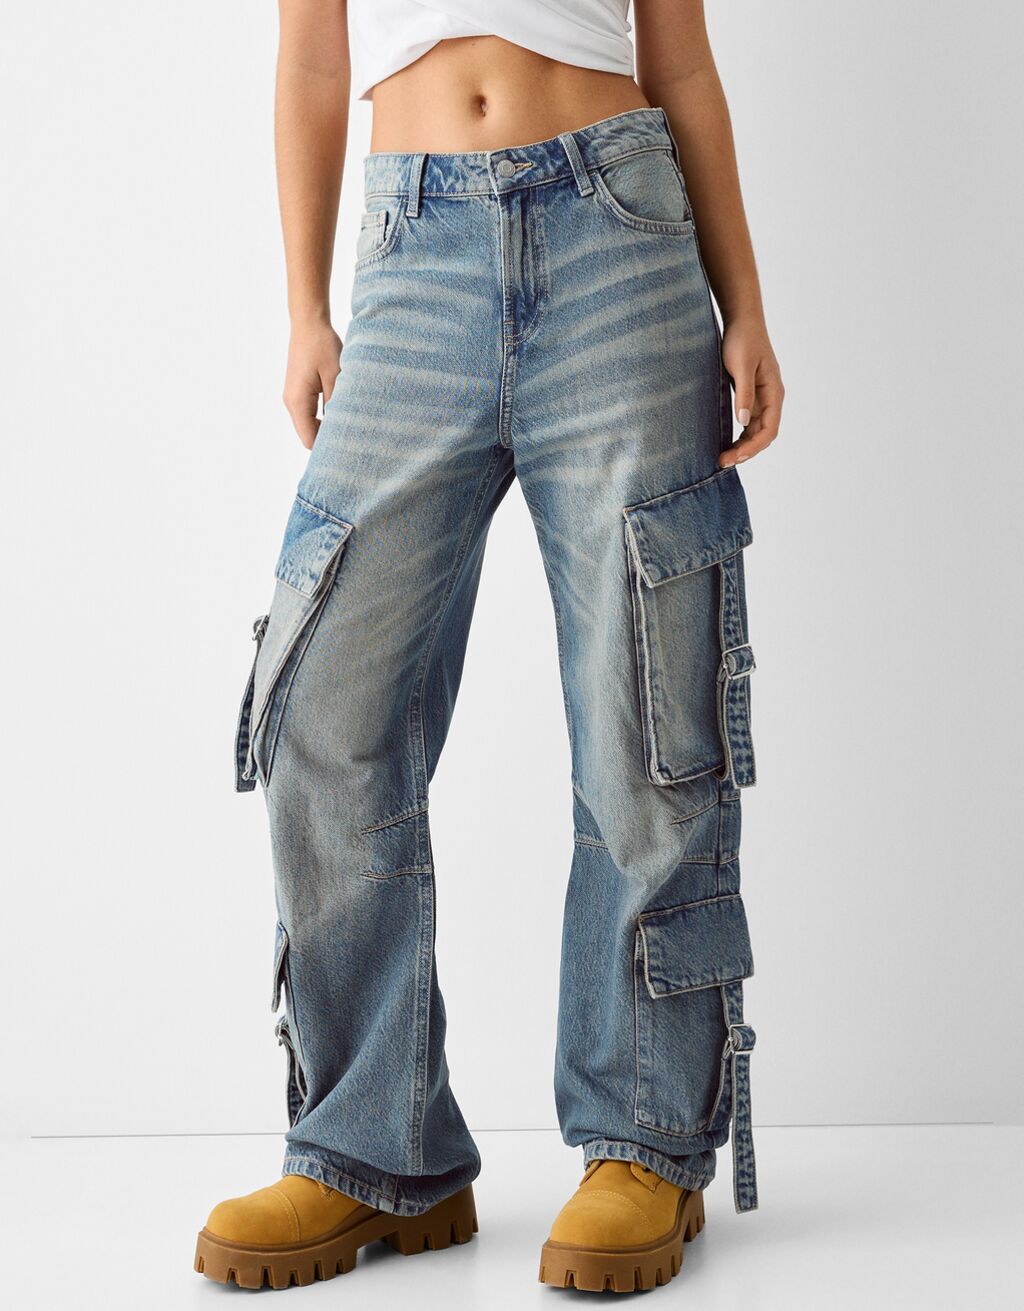 Patched Pockets Baggy Jeans in Blue